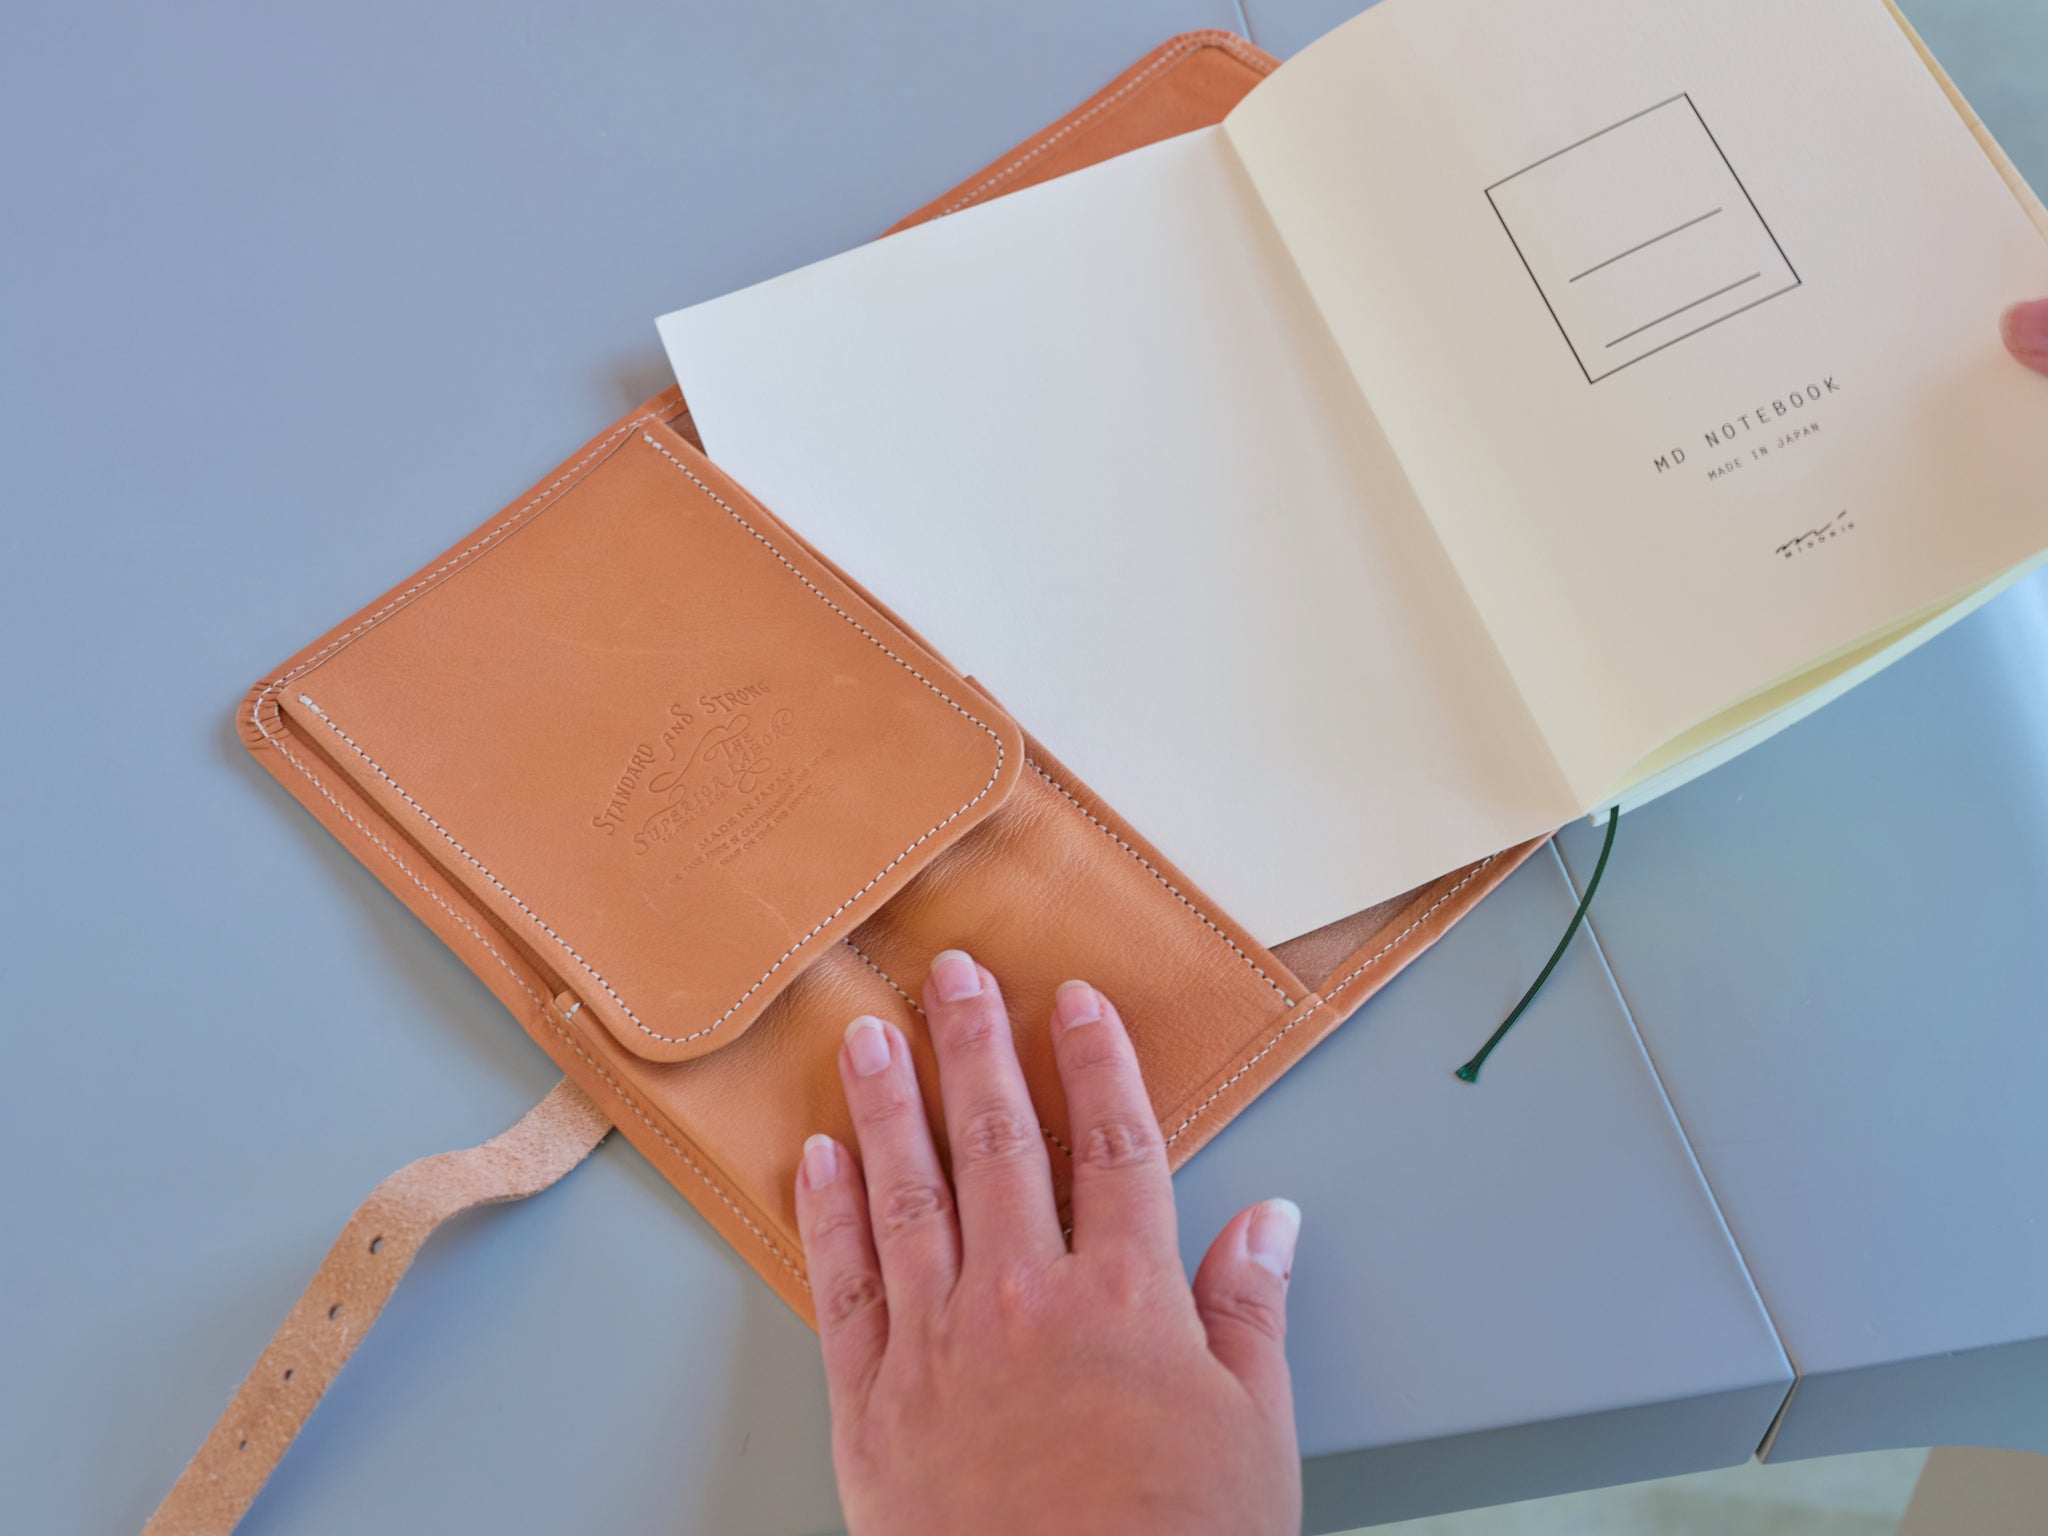 THE SUPERIOR LABOR X NOMADO STORE A5 LEATHER WRITER'S ORGANIZER